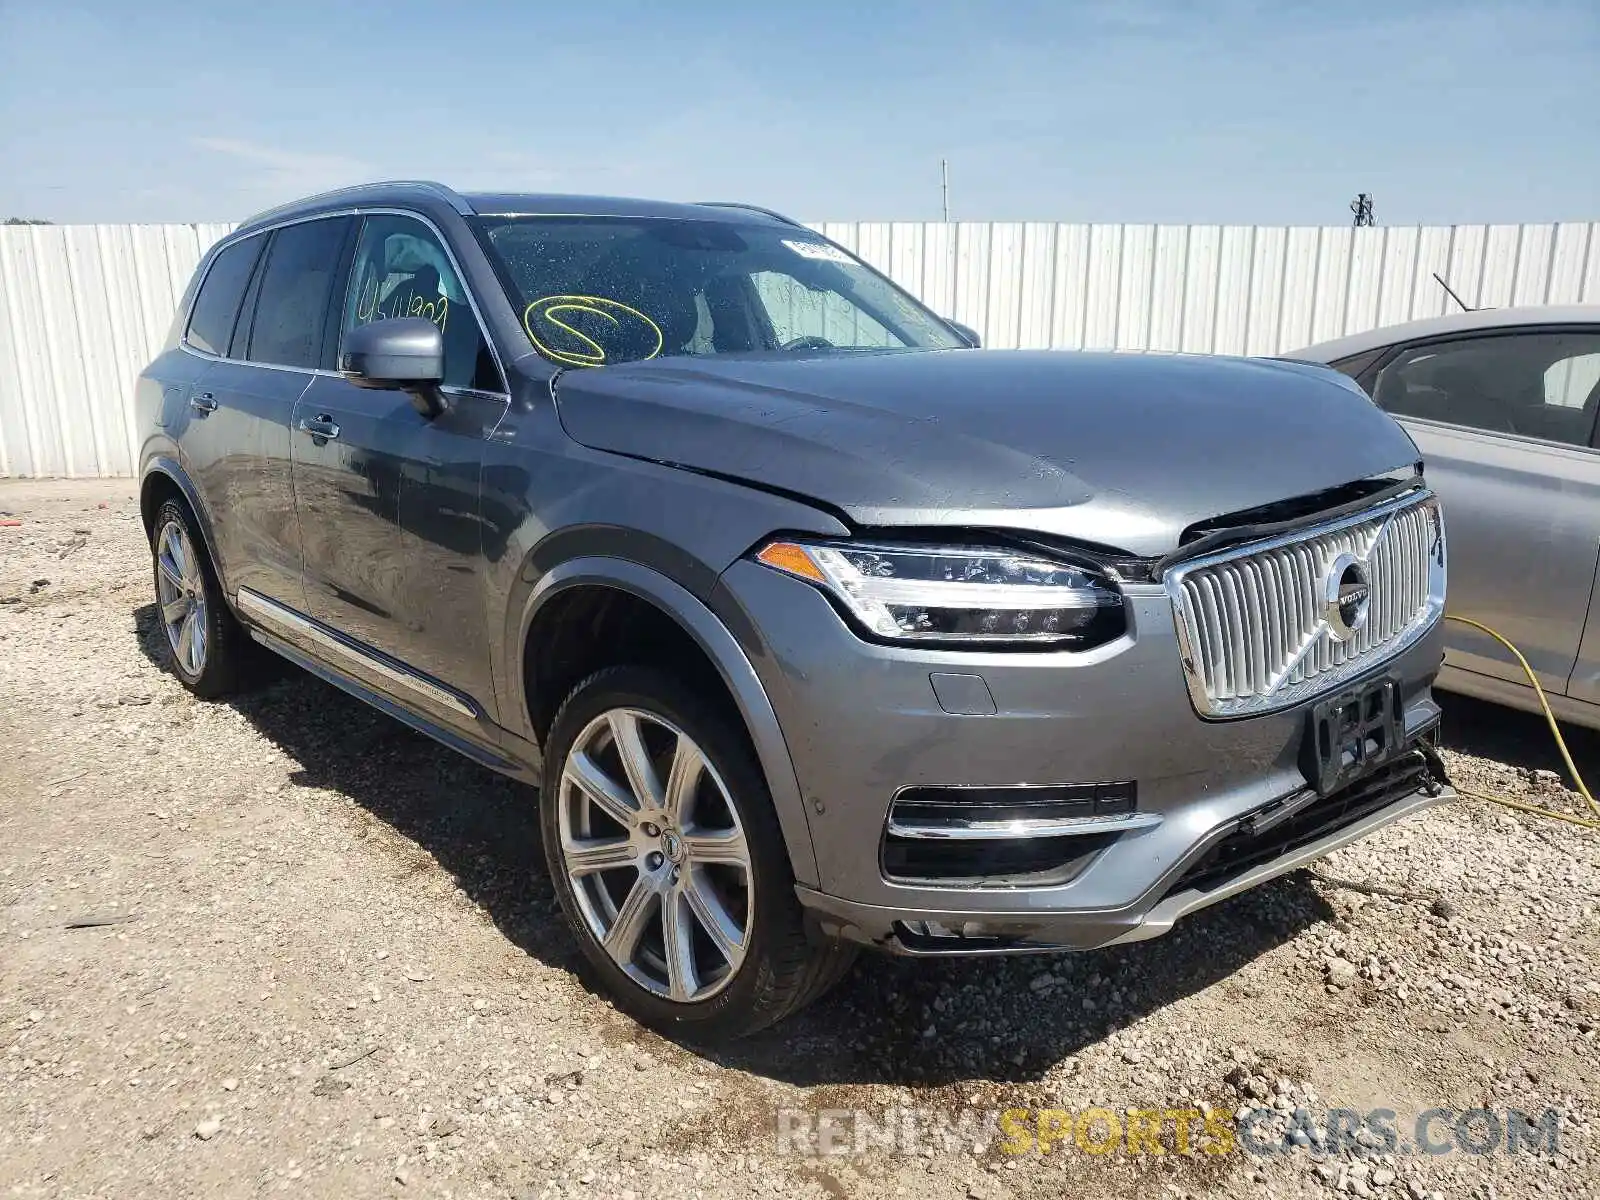 1 Photograph of a damaged car YV4A22PL2K1466890 VOLVO XC90 2019